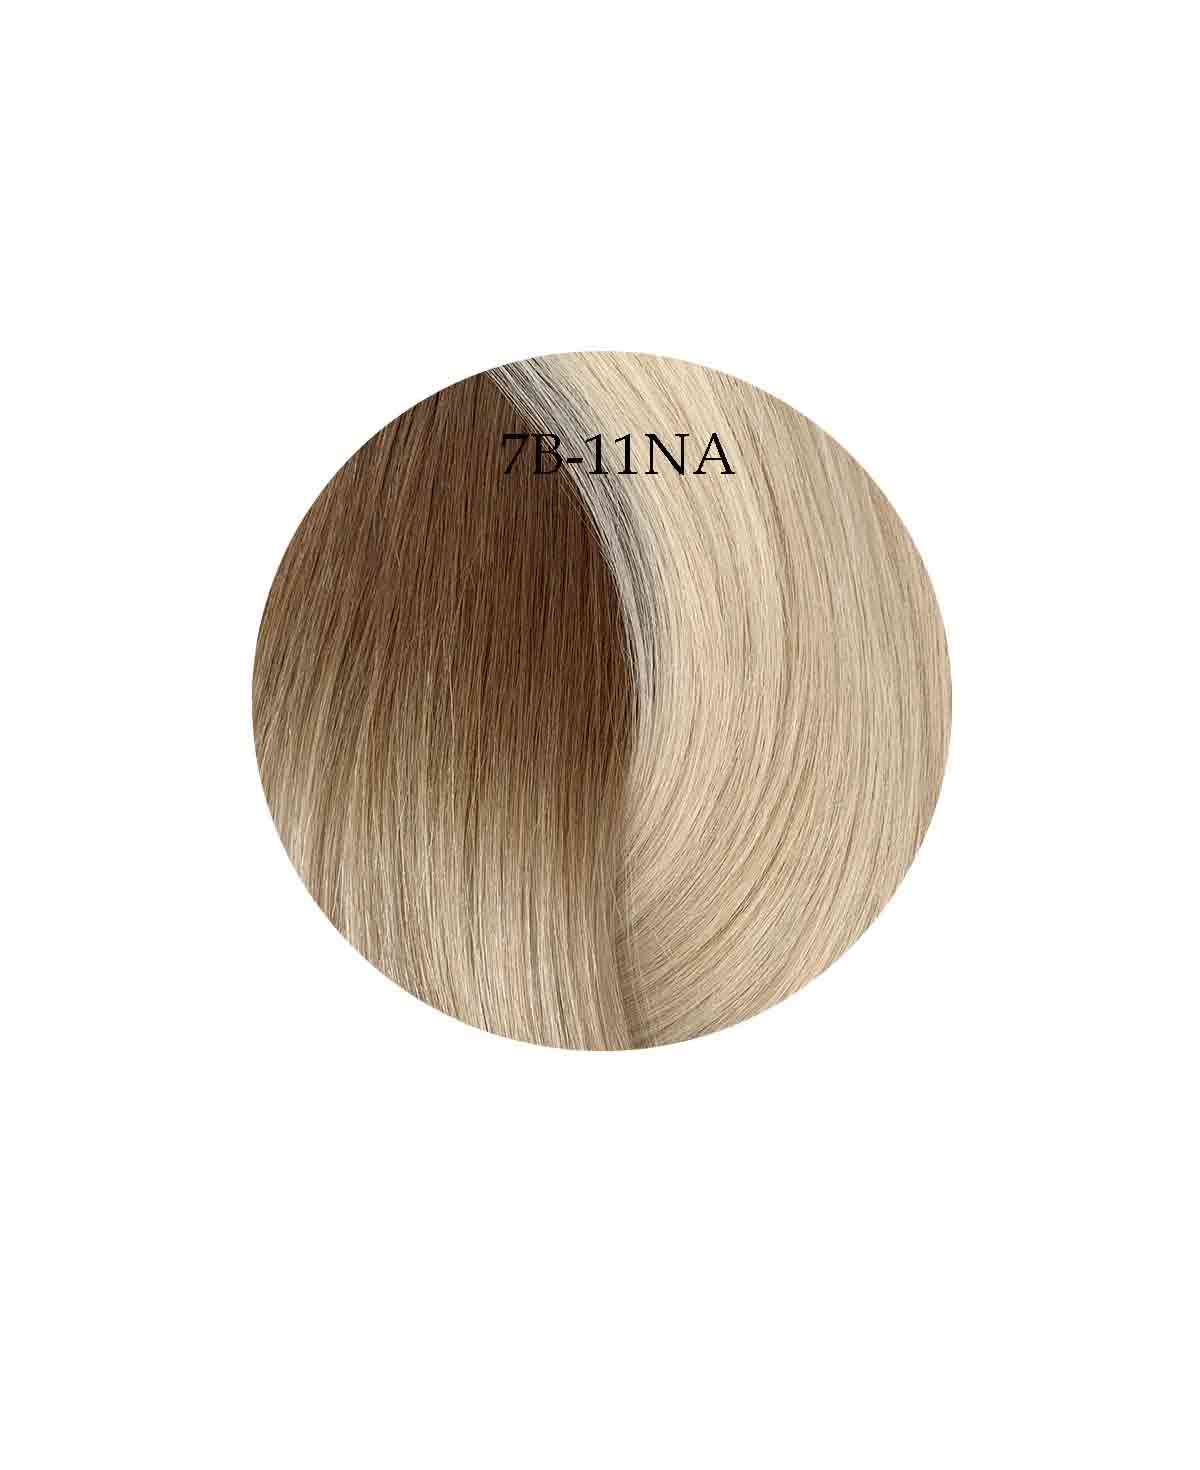 Showpony 45-50cm (20") Skin Weft Extensions - Ombre - 7B-11NA Warm Salted Caramel 